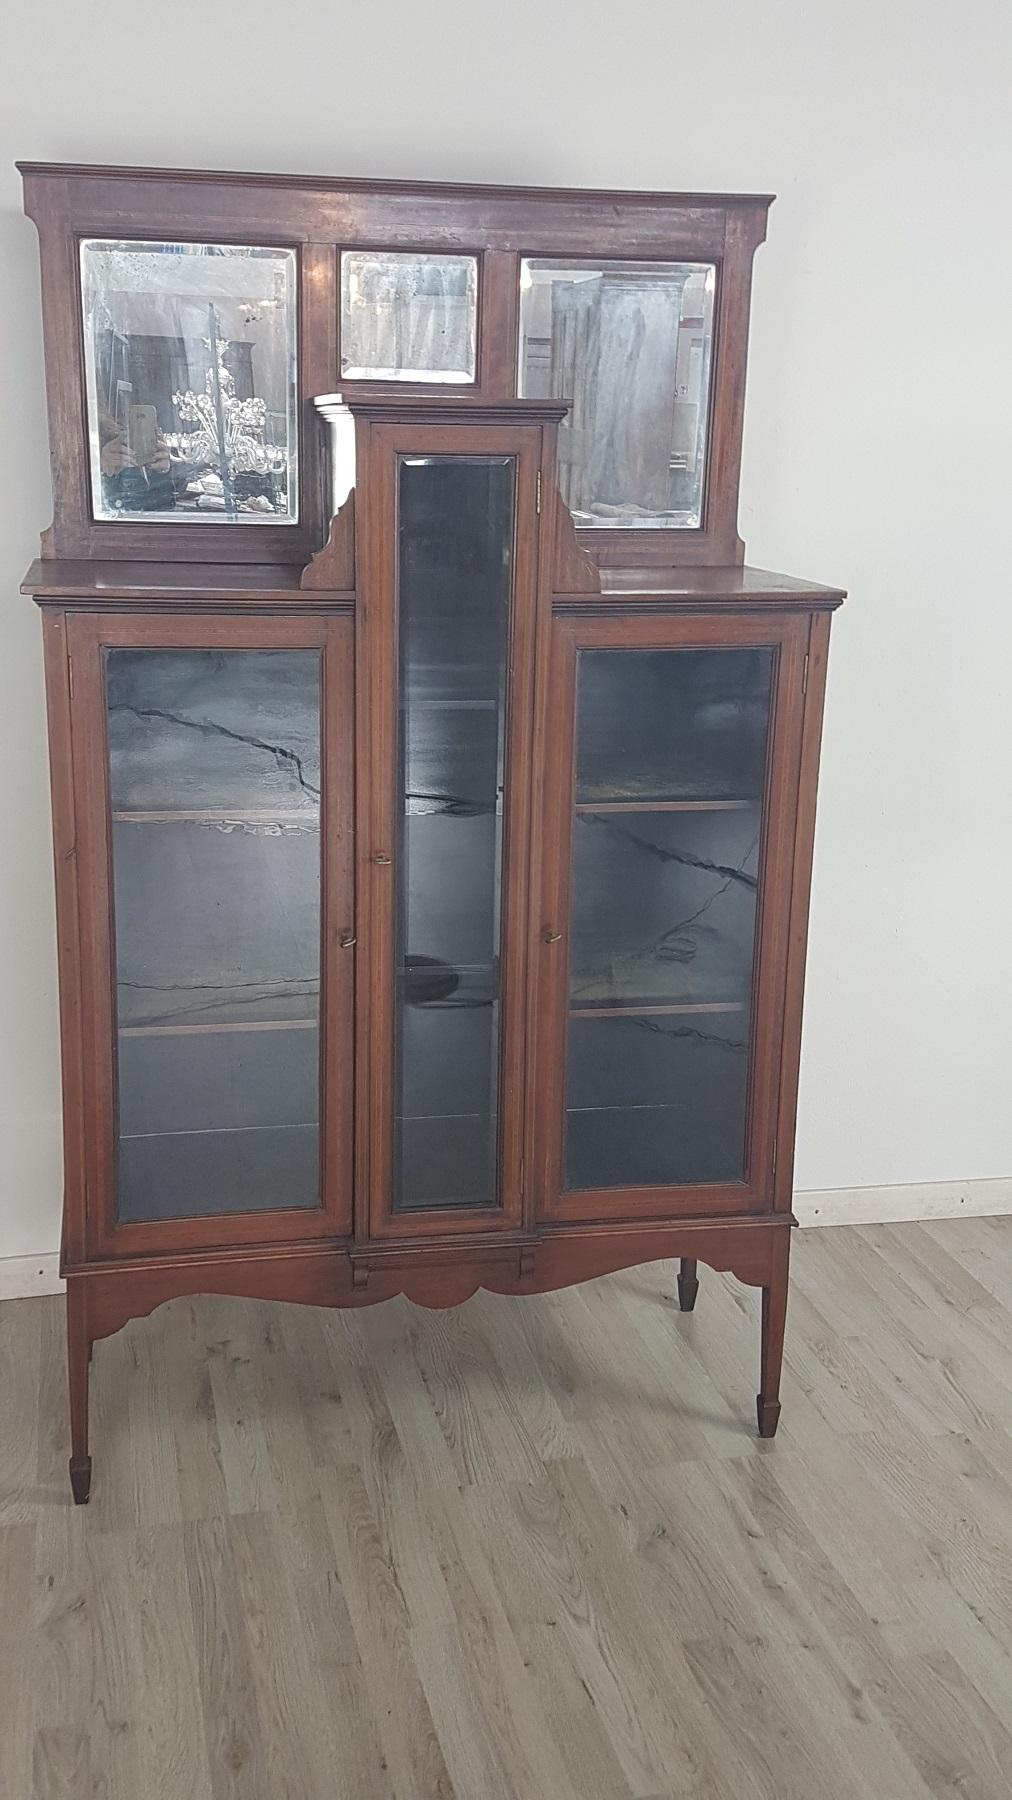 Elegant antique vitrine in walnut veneered with refined inlays and bevelled mirrors. Essential line typical of the early Liberty period of the early 1900s. Good internal capacity. The display case is used but in very good condition to indicate small